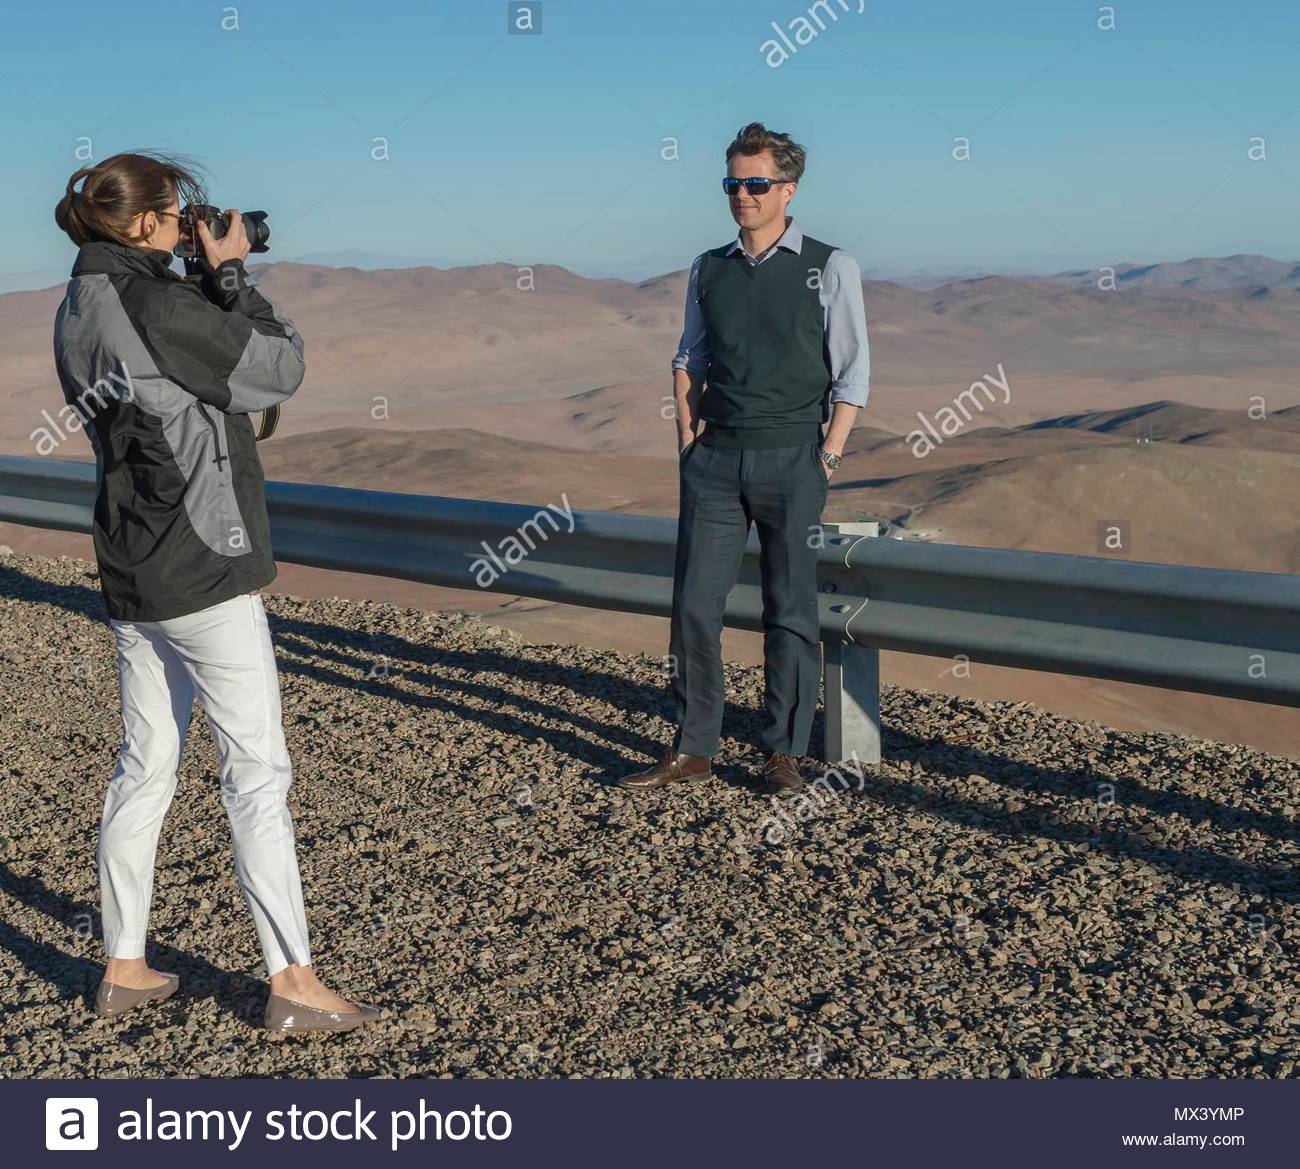 crown-prince-frederik-and-crown-princess-mary-crown-prince-couple-on-an-official-visit-to-chile-crown-prince-frederik-and-crown-princess-mary-at-the-eso-european-southern-observatory-in-paranal-antofagasto-chile-code-03799mh-photo-martin-hoeienall-over-press-denmark-MX3YMP.jpg